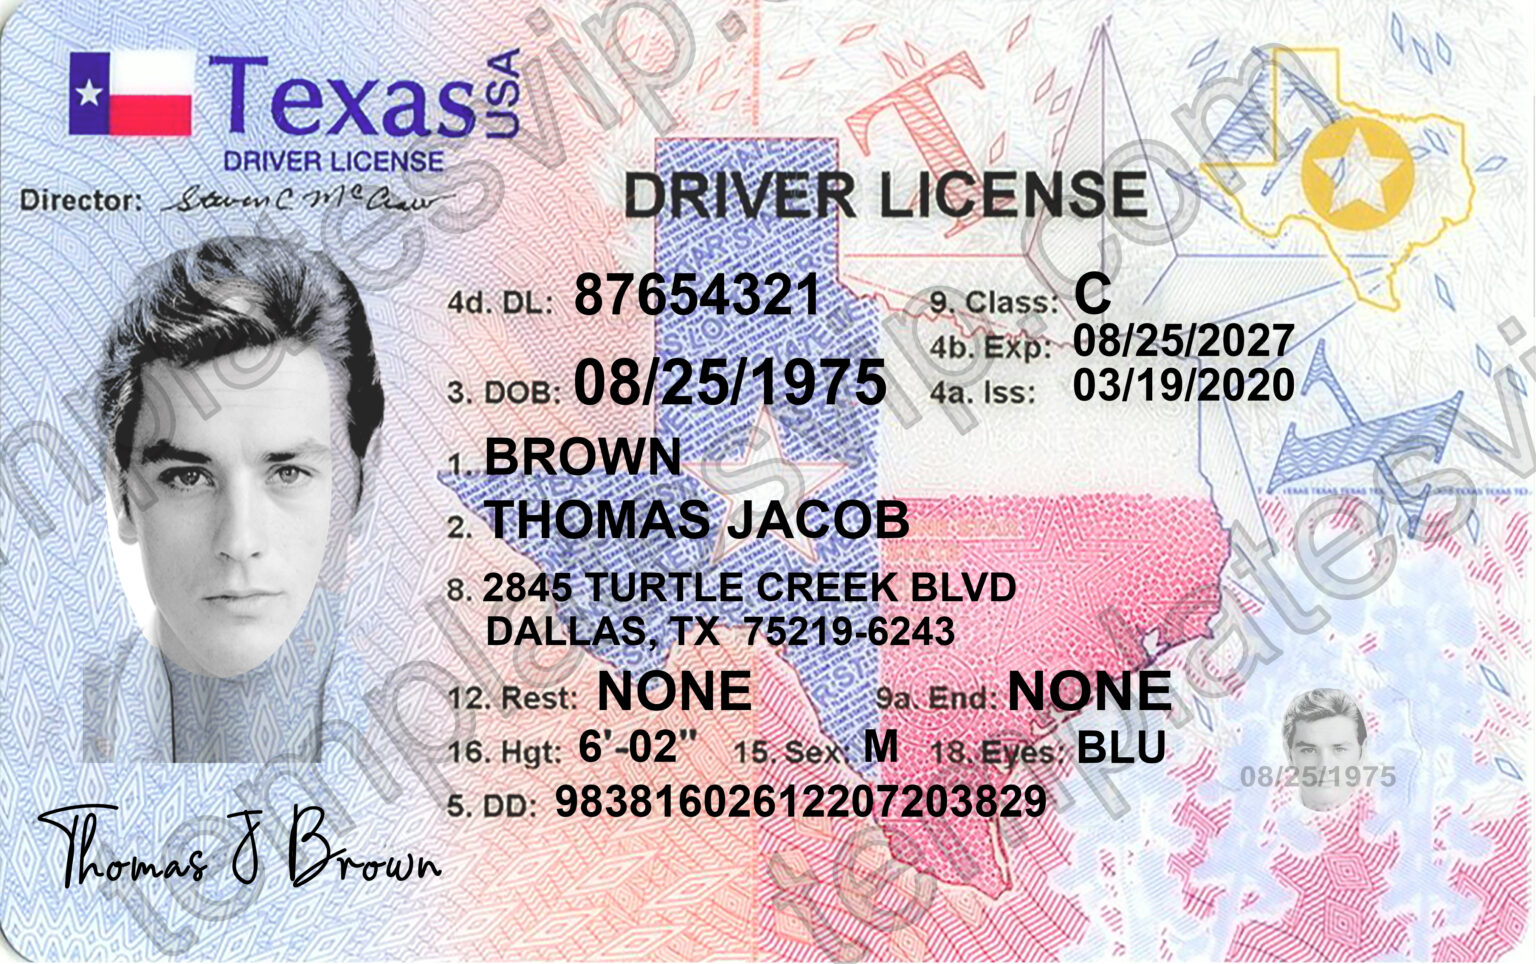 Texas (TX) Driver’s License PSD Template Download 2022 Templates